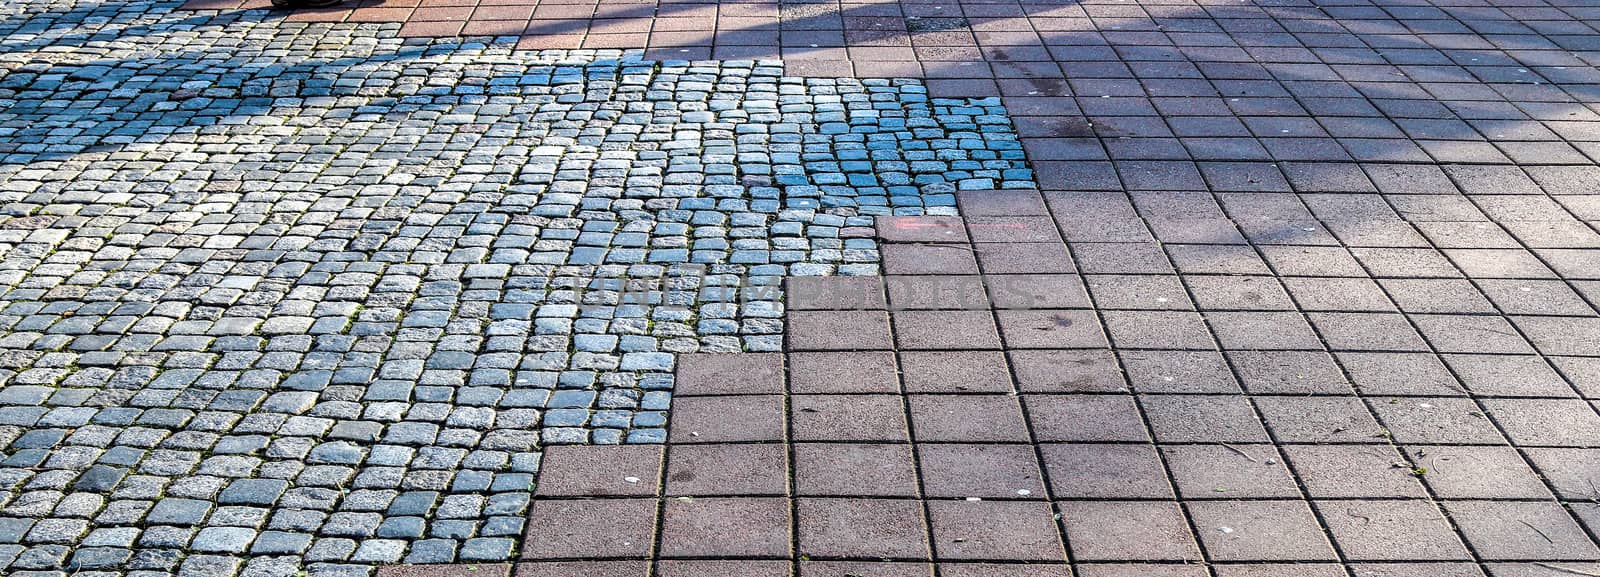 Shadows of people in a shopping area on a cobblestone ground